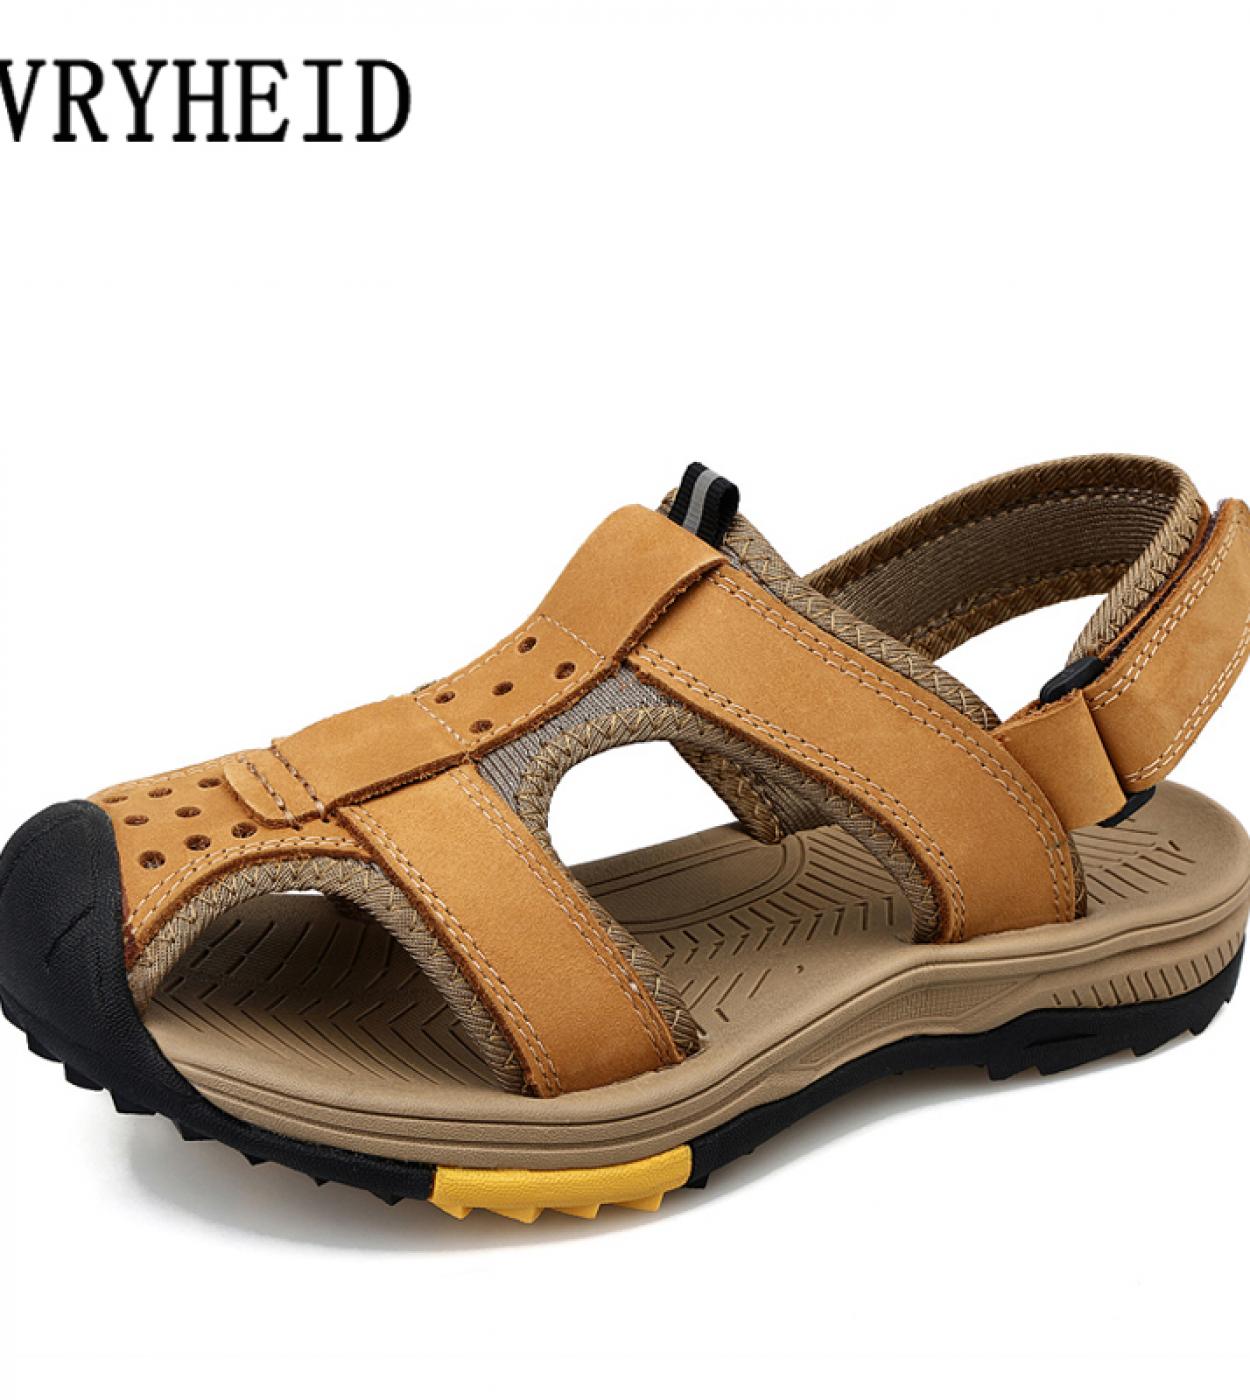 Vryheid Summer Mens Sandals Genuine Leather Gladiator Men Beach Wading Shoes Soft Comfortable Outdoors Sport Casual Hik